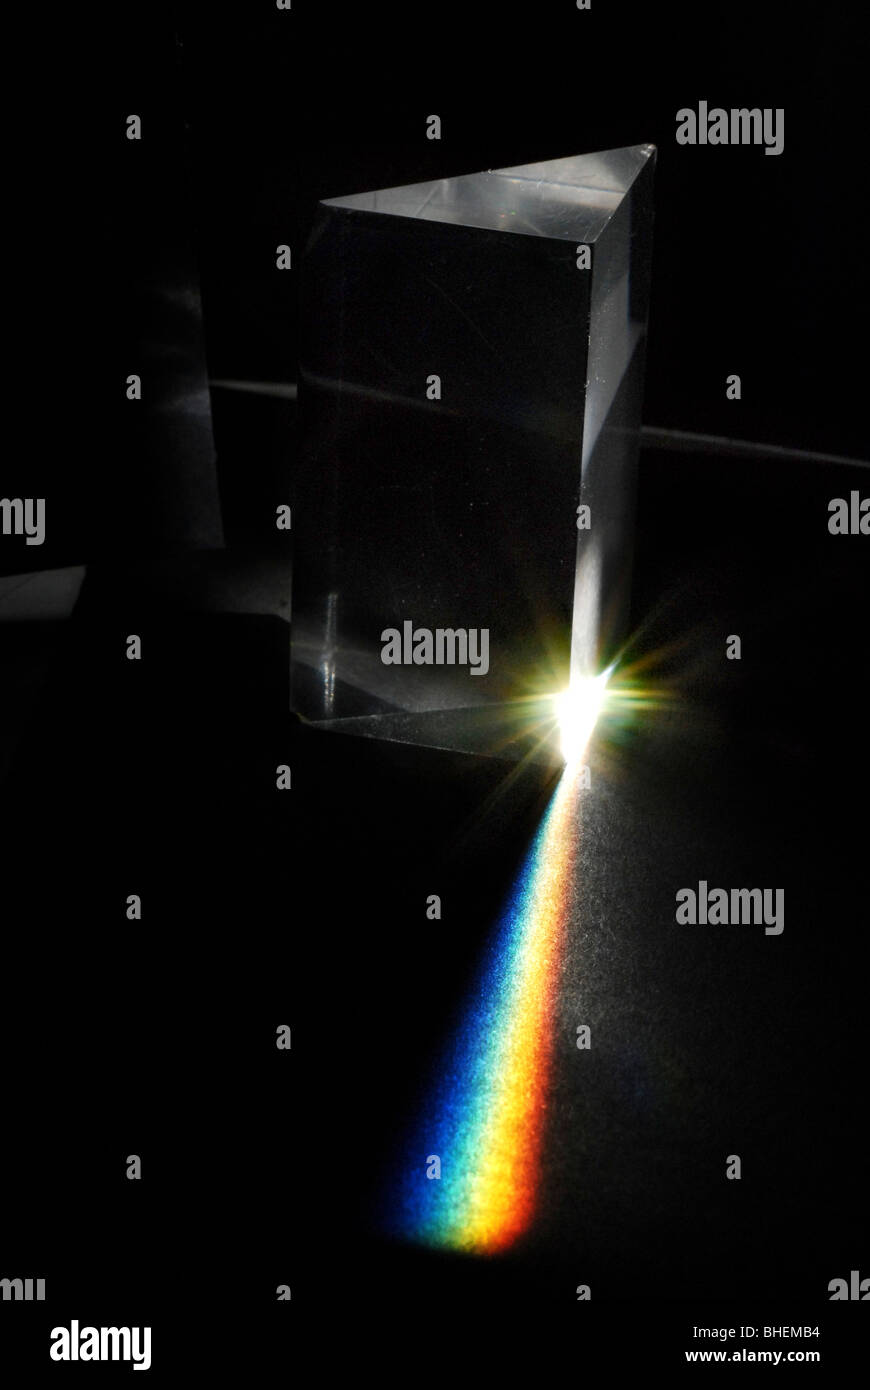 Light spectrum reflected through a prism Stock Photo